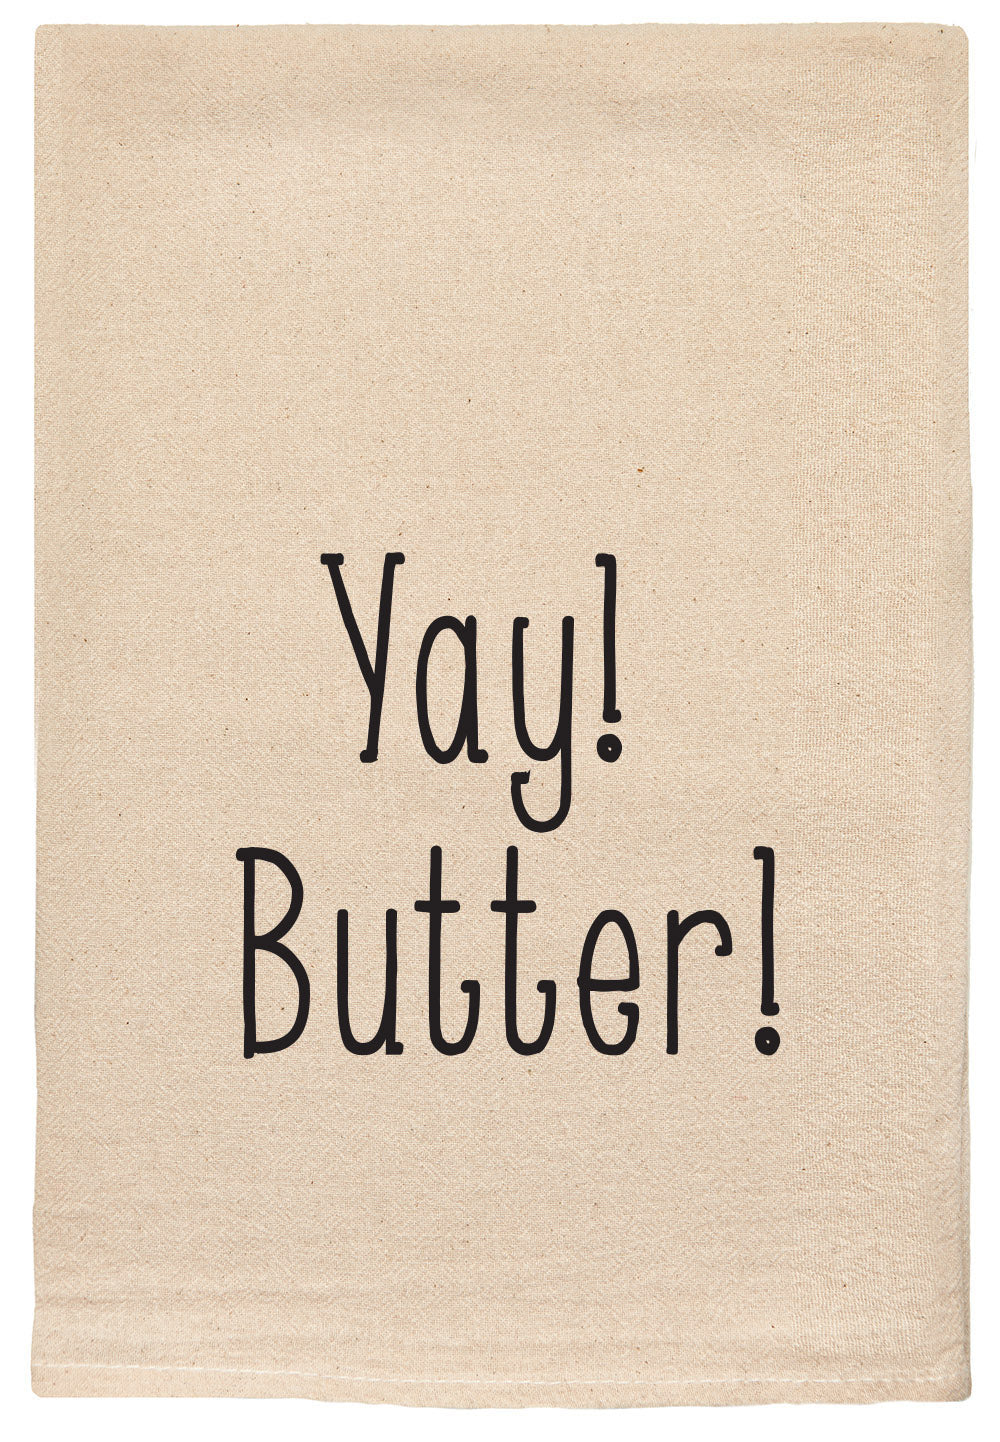 yay! butter!